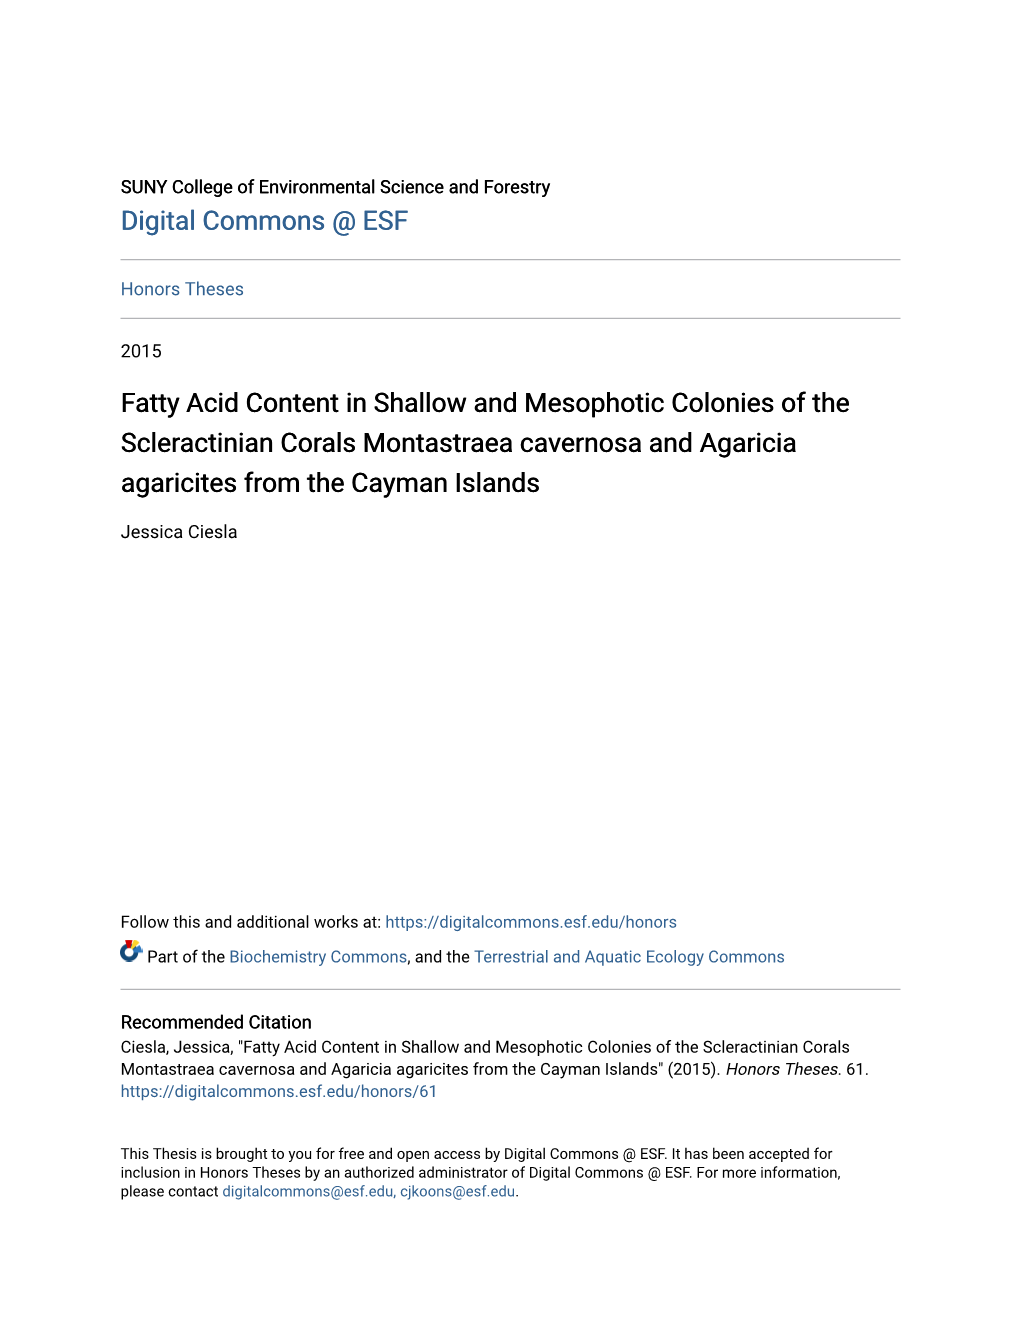 Fatty Acid Content in Shallow and Mesophotic Colonies of the Scleractinian Corals Montastraea Cavernosa and Agaricia Agaricites from the Cayman Islands